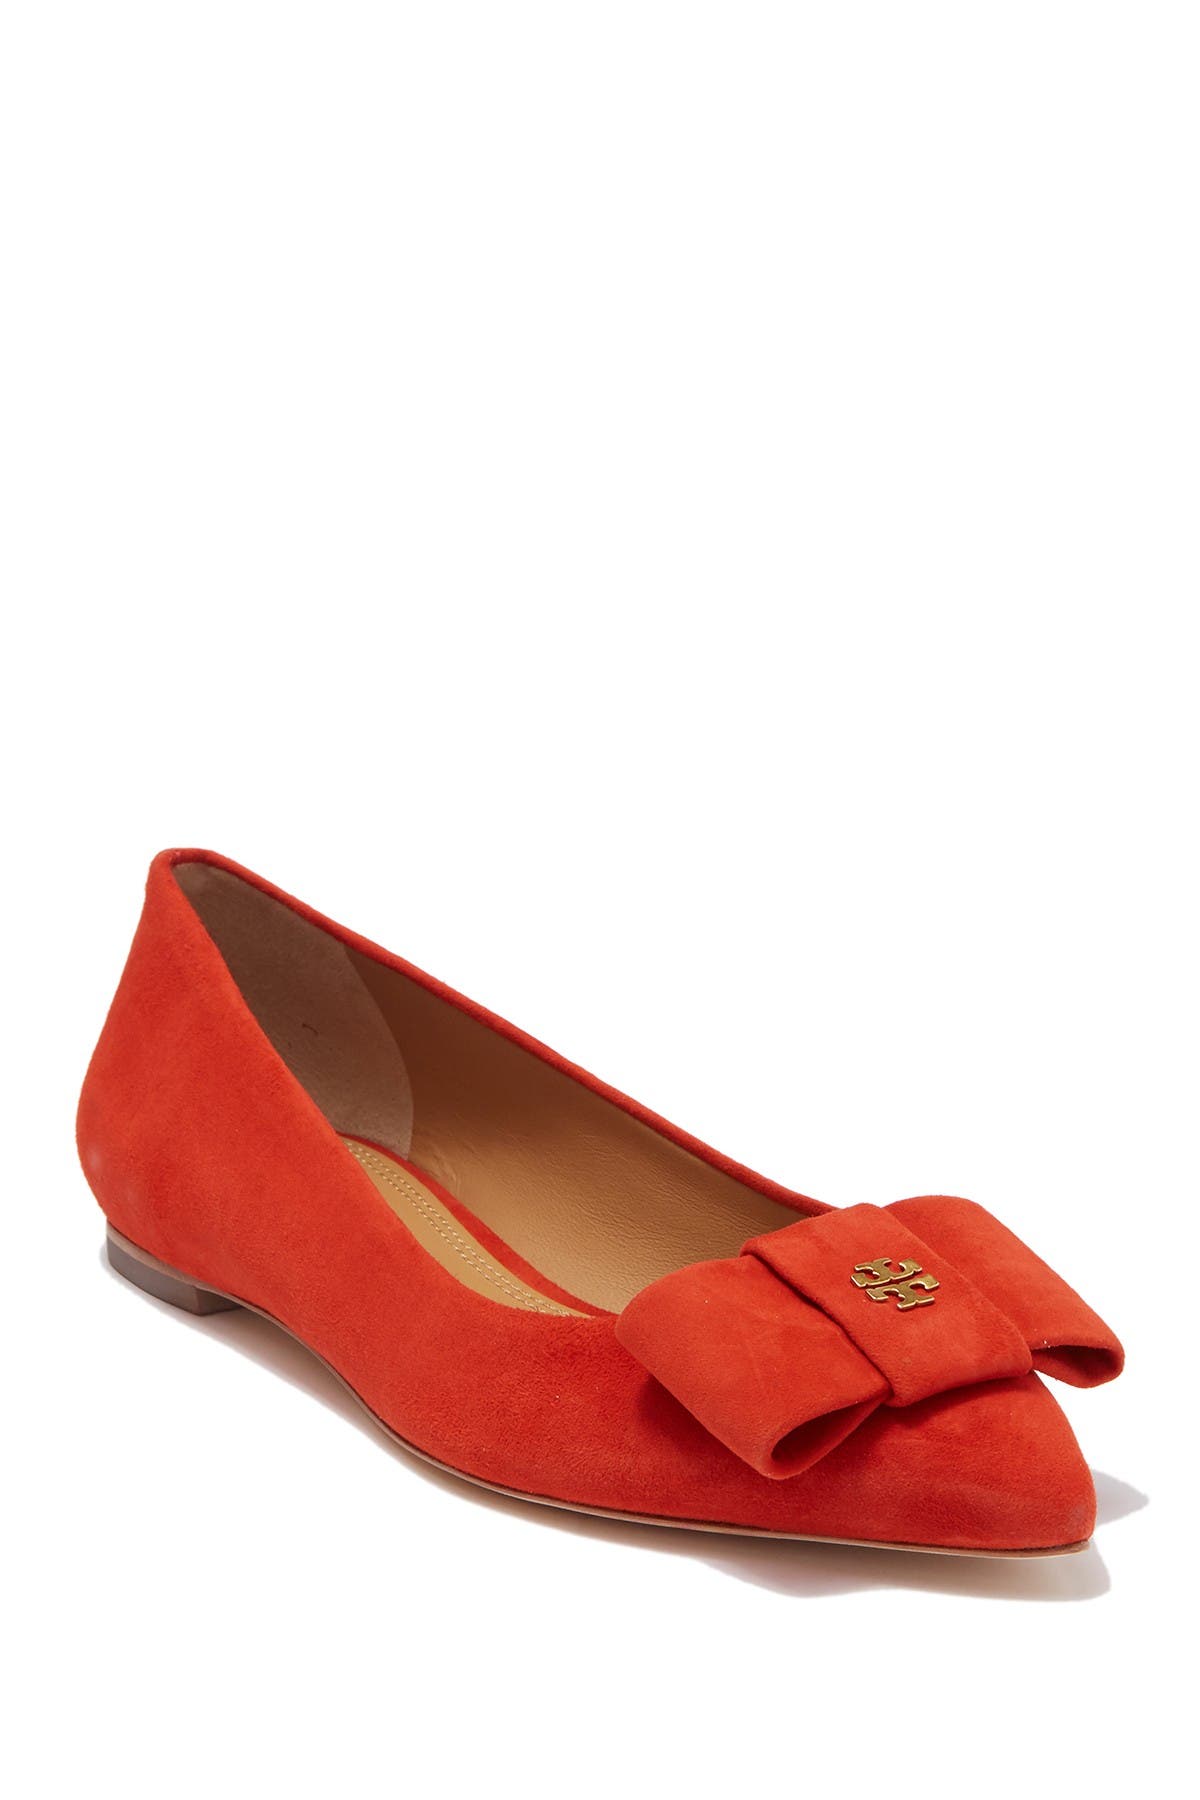 tory burch marion quilted ballet flat